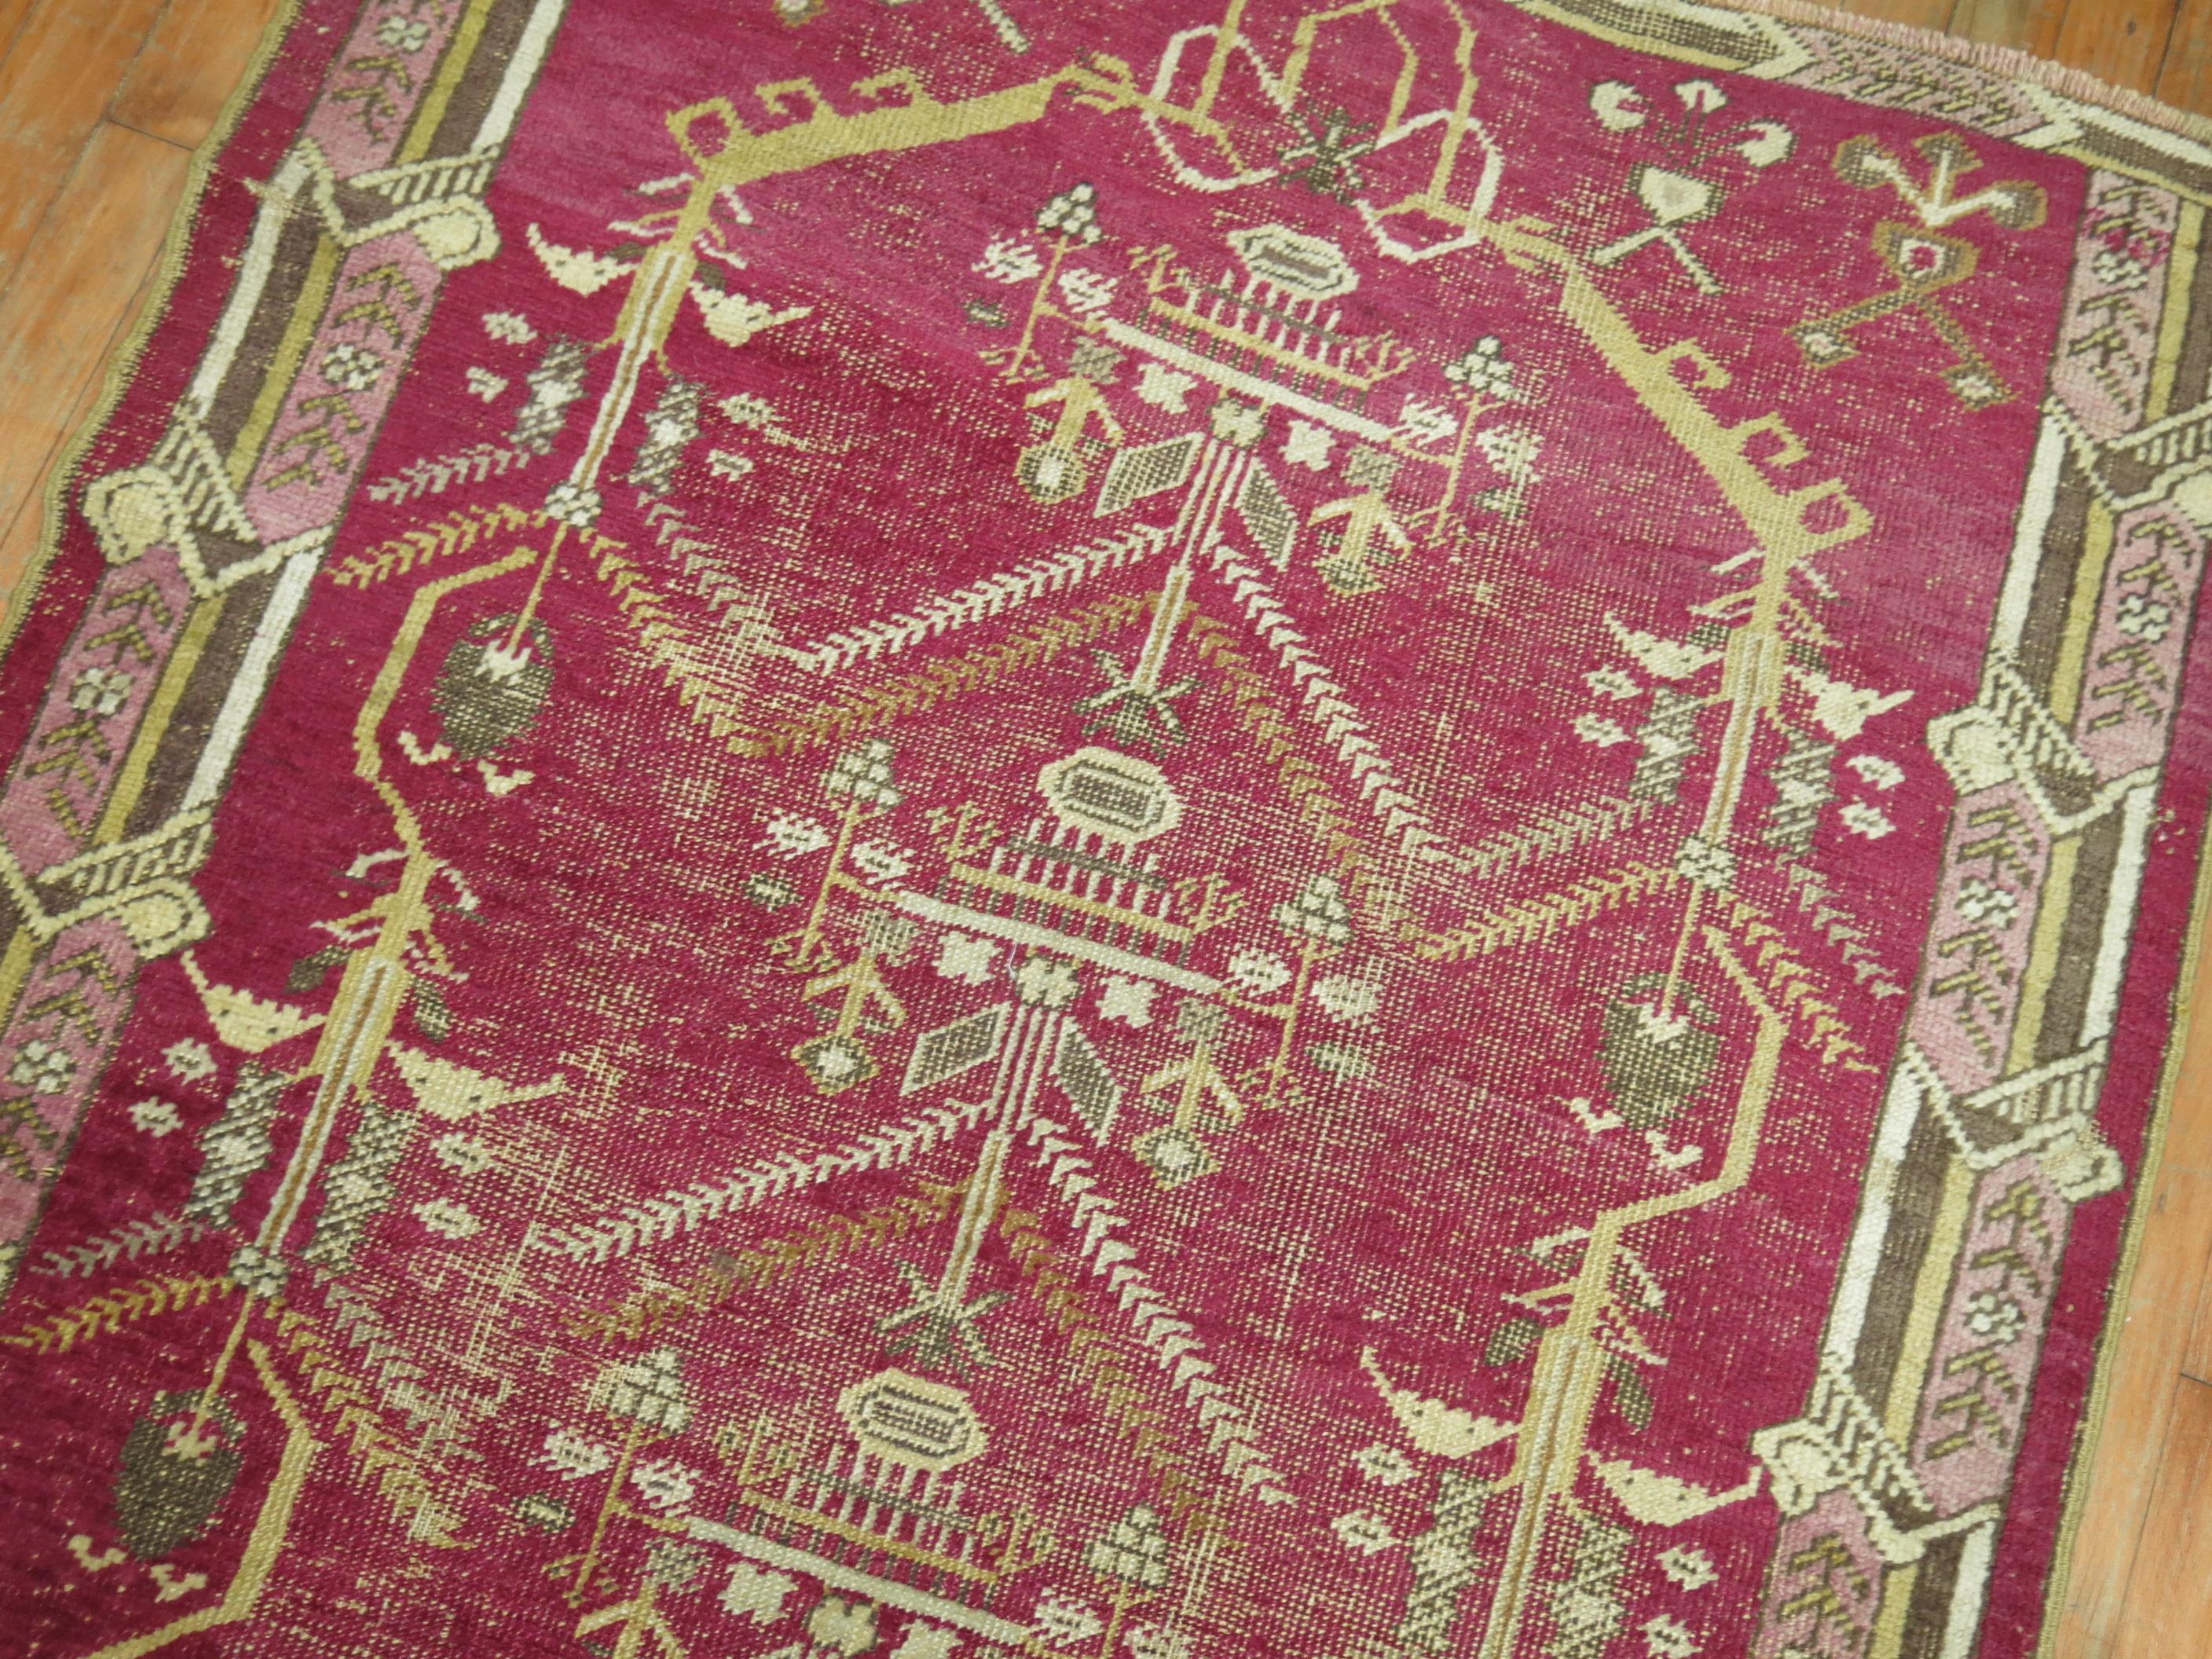 A one of a kind antique decorative Turkish Ghiordes rug.